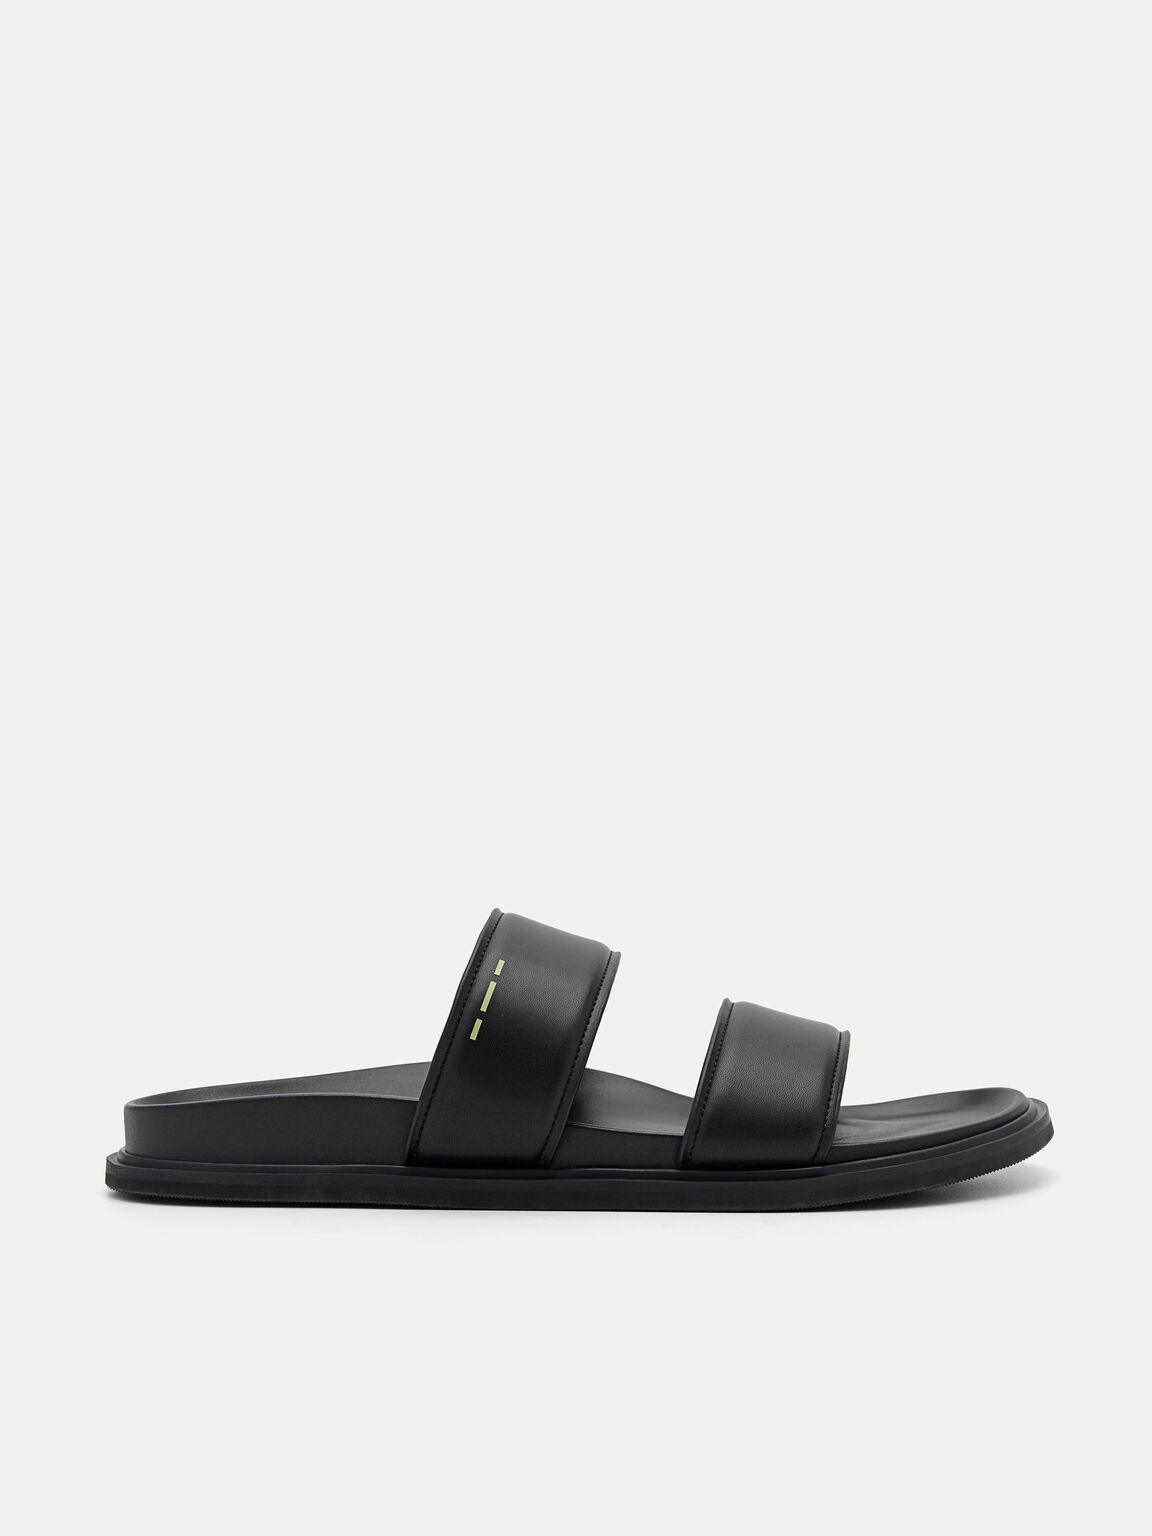 rePEDRO Recycled Leather Slide Sandals, Black